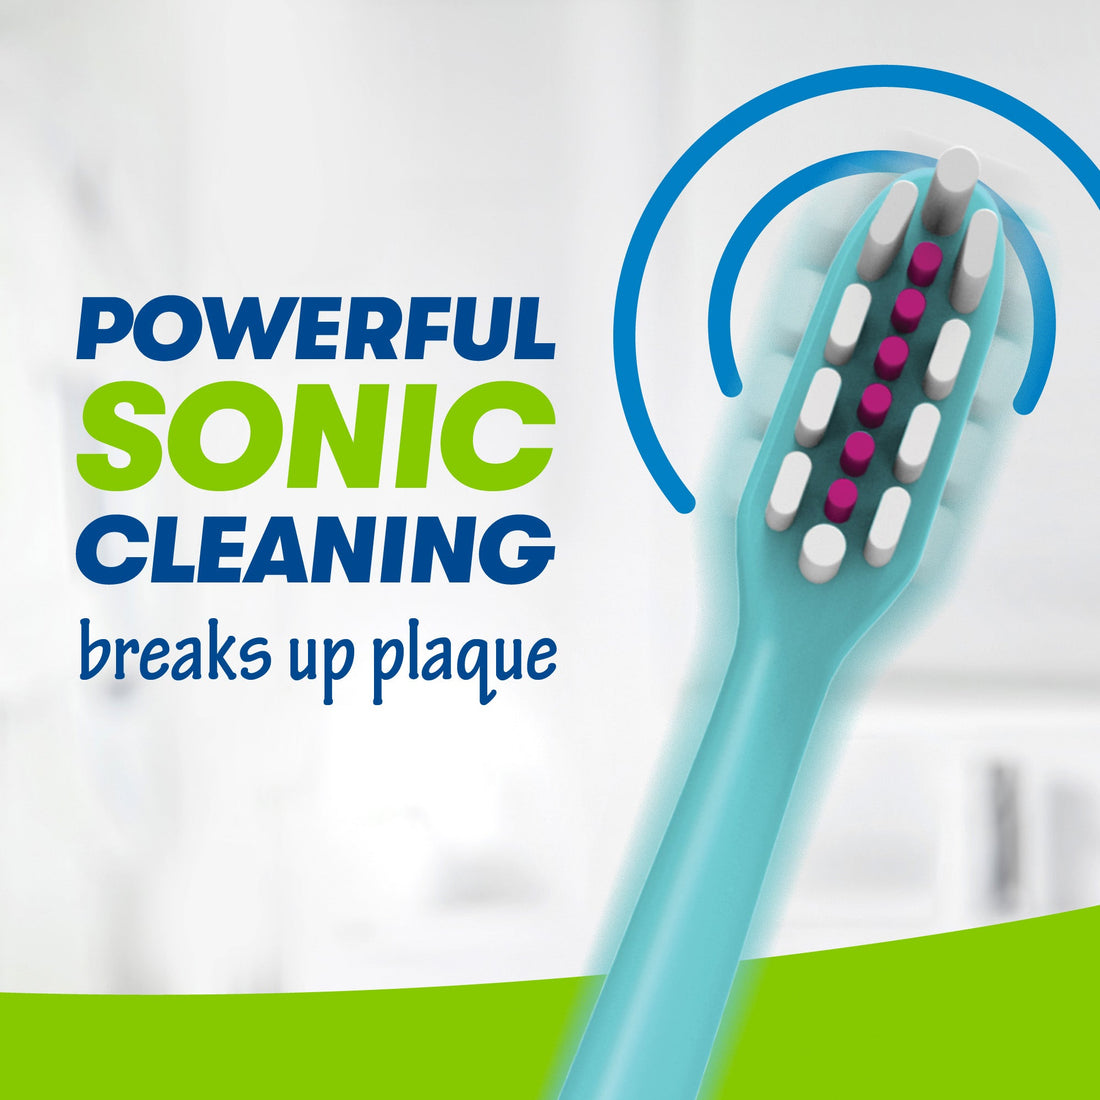  Close up of LOL SURPRISE! Toothbrush, Powerful Sonic cleaning breaks up plaque